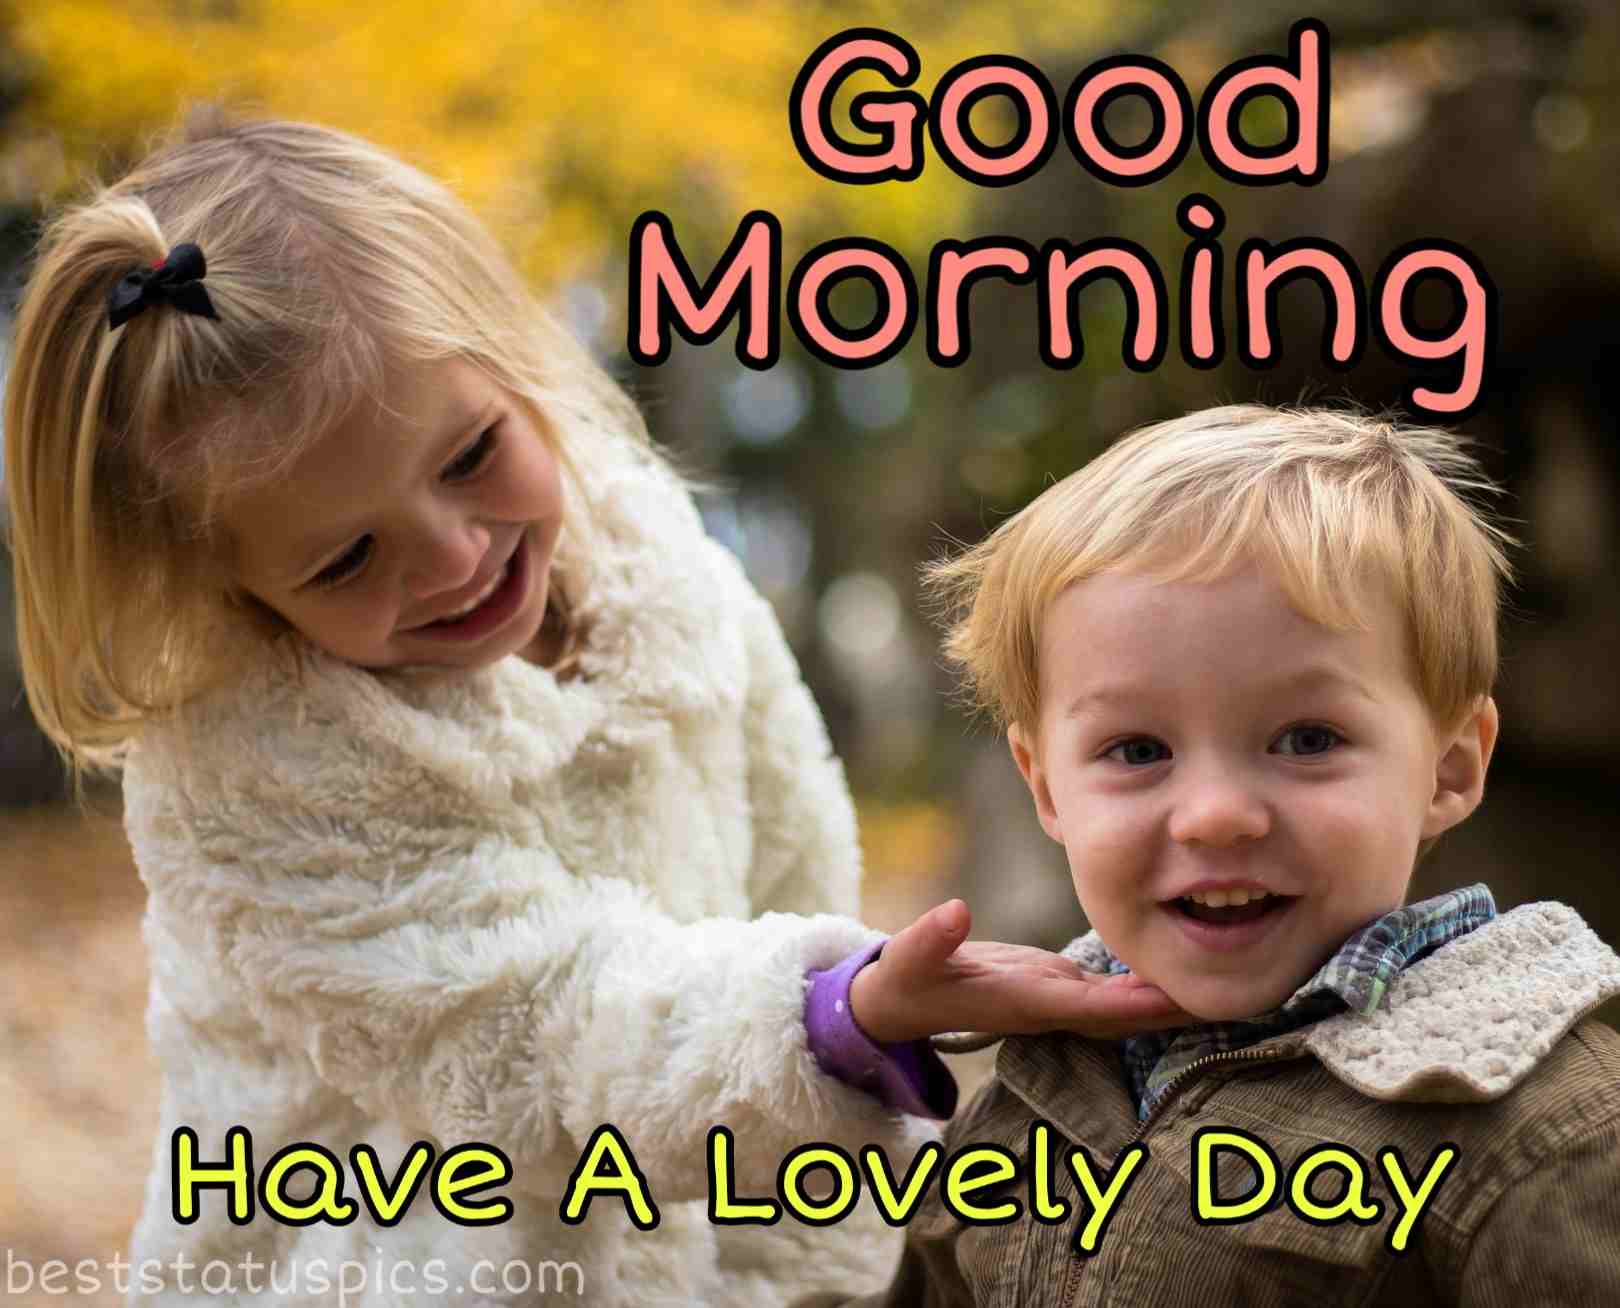 Good morning wishes with babies images for Whatsapp status